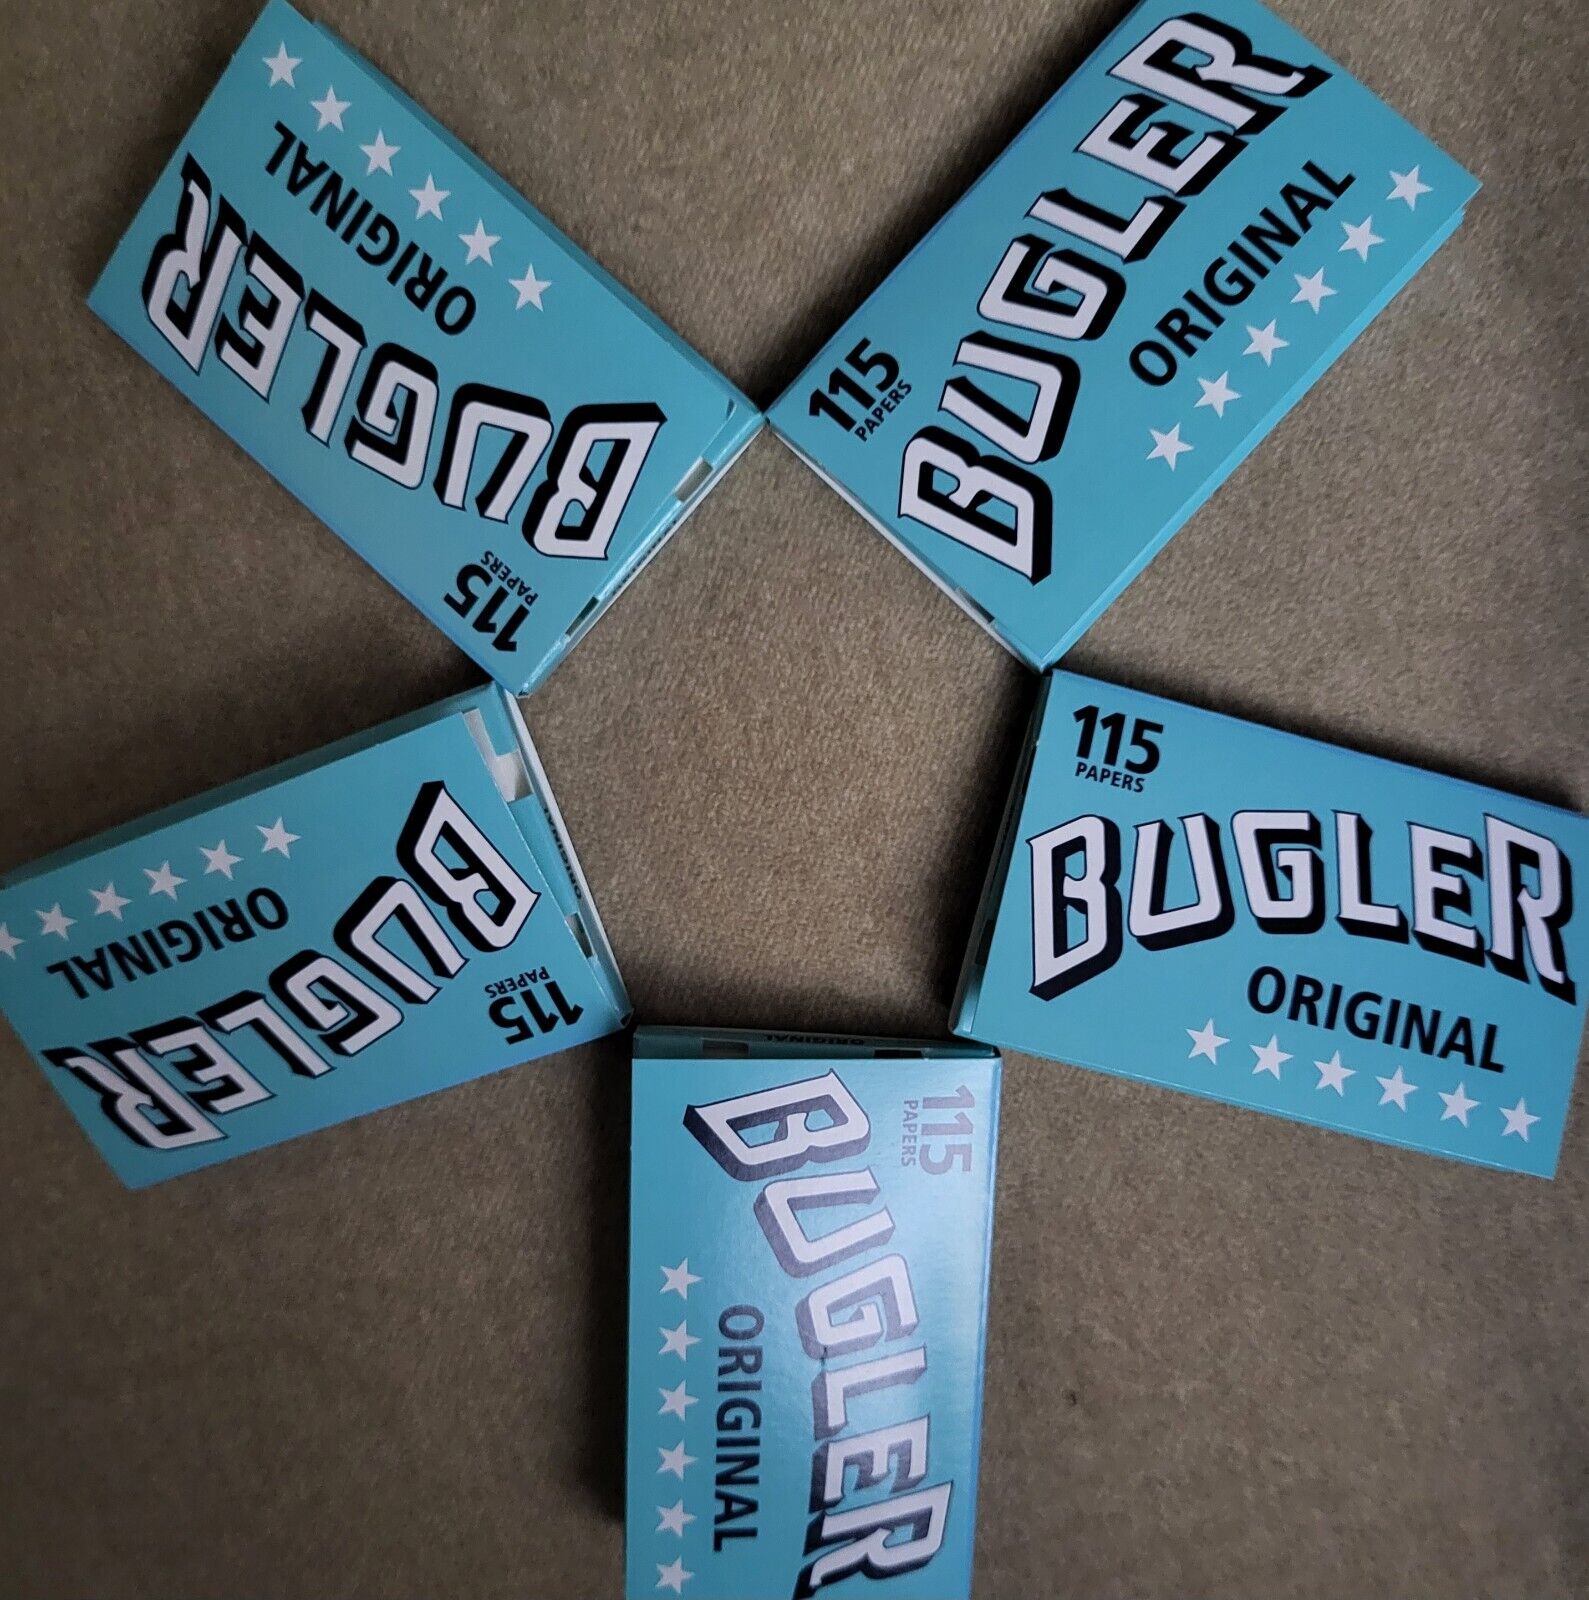 BUGLER ORIGINAL CIGARETTES ROLLING PAPERS 115 SINGLE WIDE 70MM[NEW PACK OF 5] 